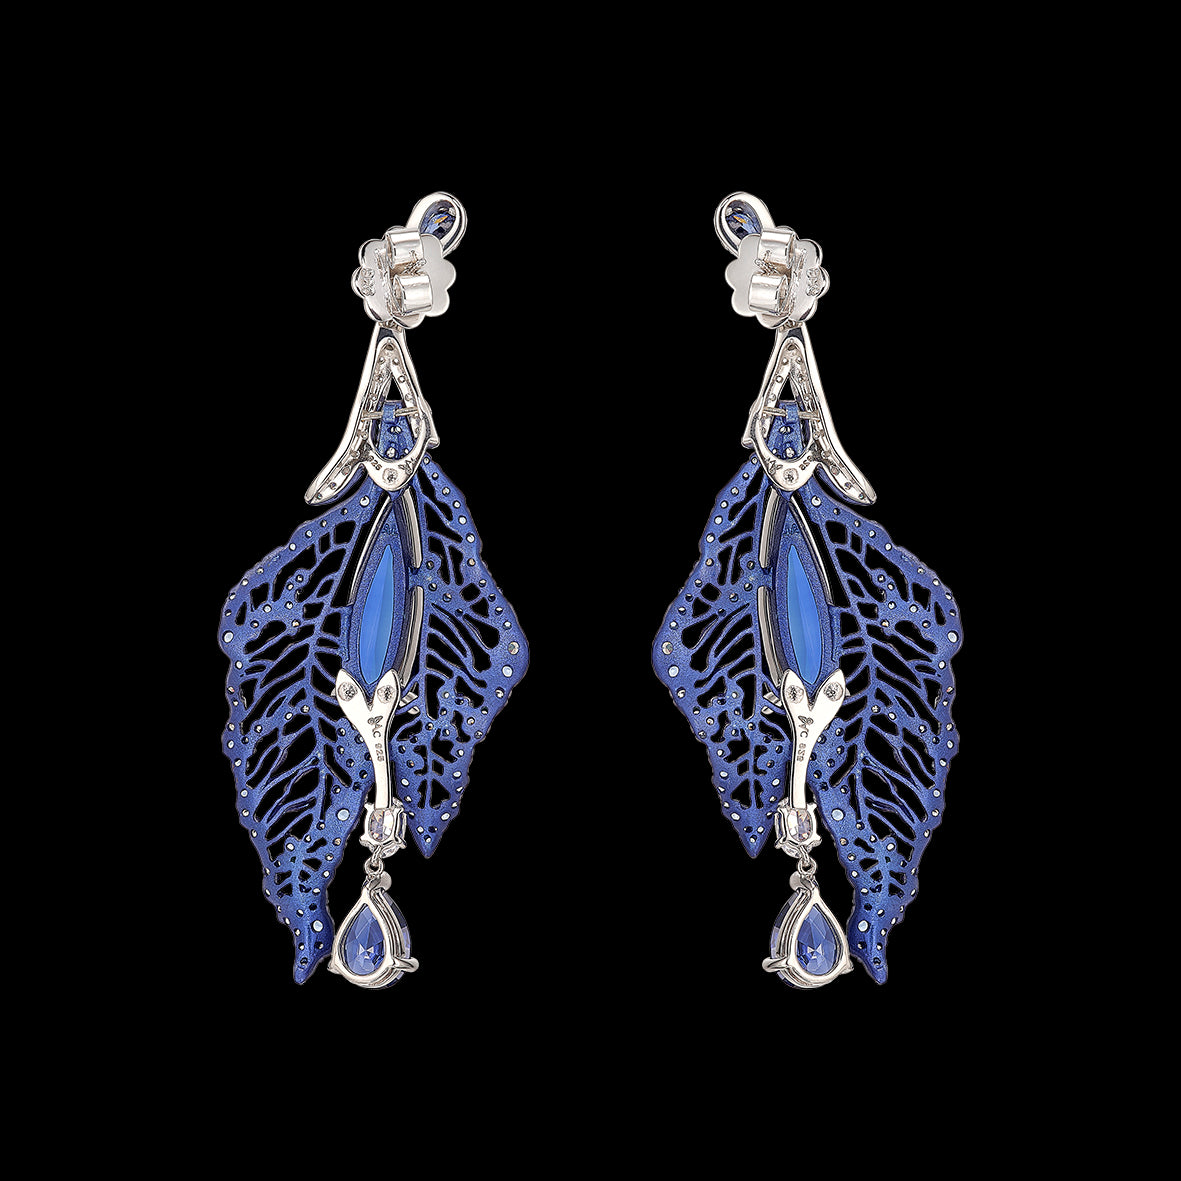 Sapphire Atlantis Earrings, Earring, Anabela Chan Joaillerie - Fine jewelry with laboratory grown and created gemstones hand-crafted in the United Kingdom. Anabela Chan Joaillerie is the first fine jewellery brand in the world to champion laboratory-grown and created gemstones with high jewellery design, artisanal craftsmanship and a focus on ethical and sustainable innovations.